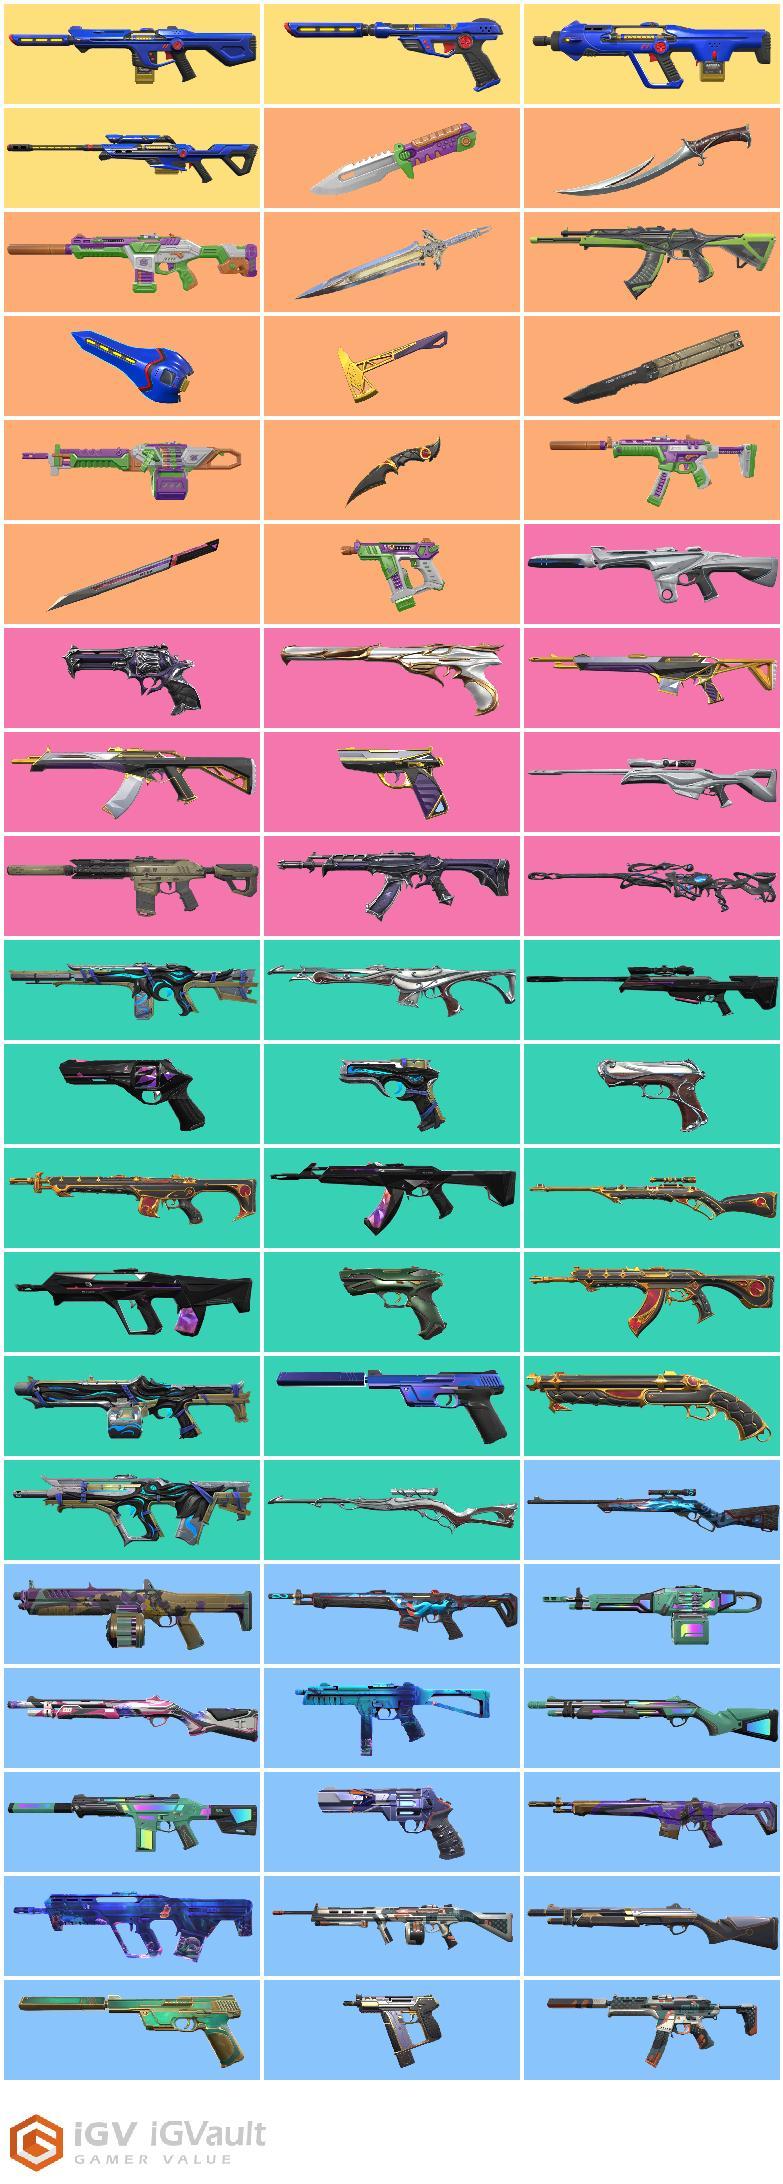 LATAM / 81 SKINS (FULL COLLECTION Radiant Entertainment)) + 8 RARE KNIVES / MAIL (FULL ACCESS) / LUX QUALITY 